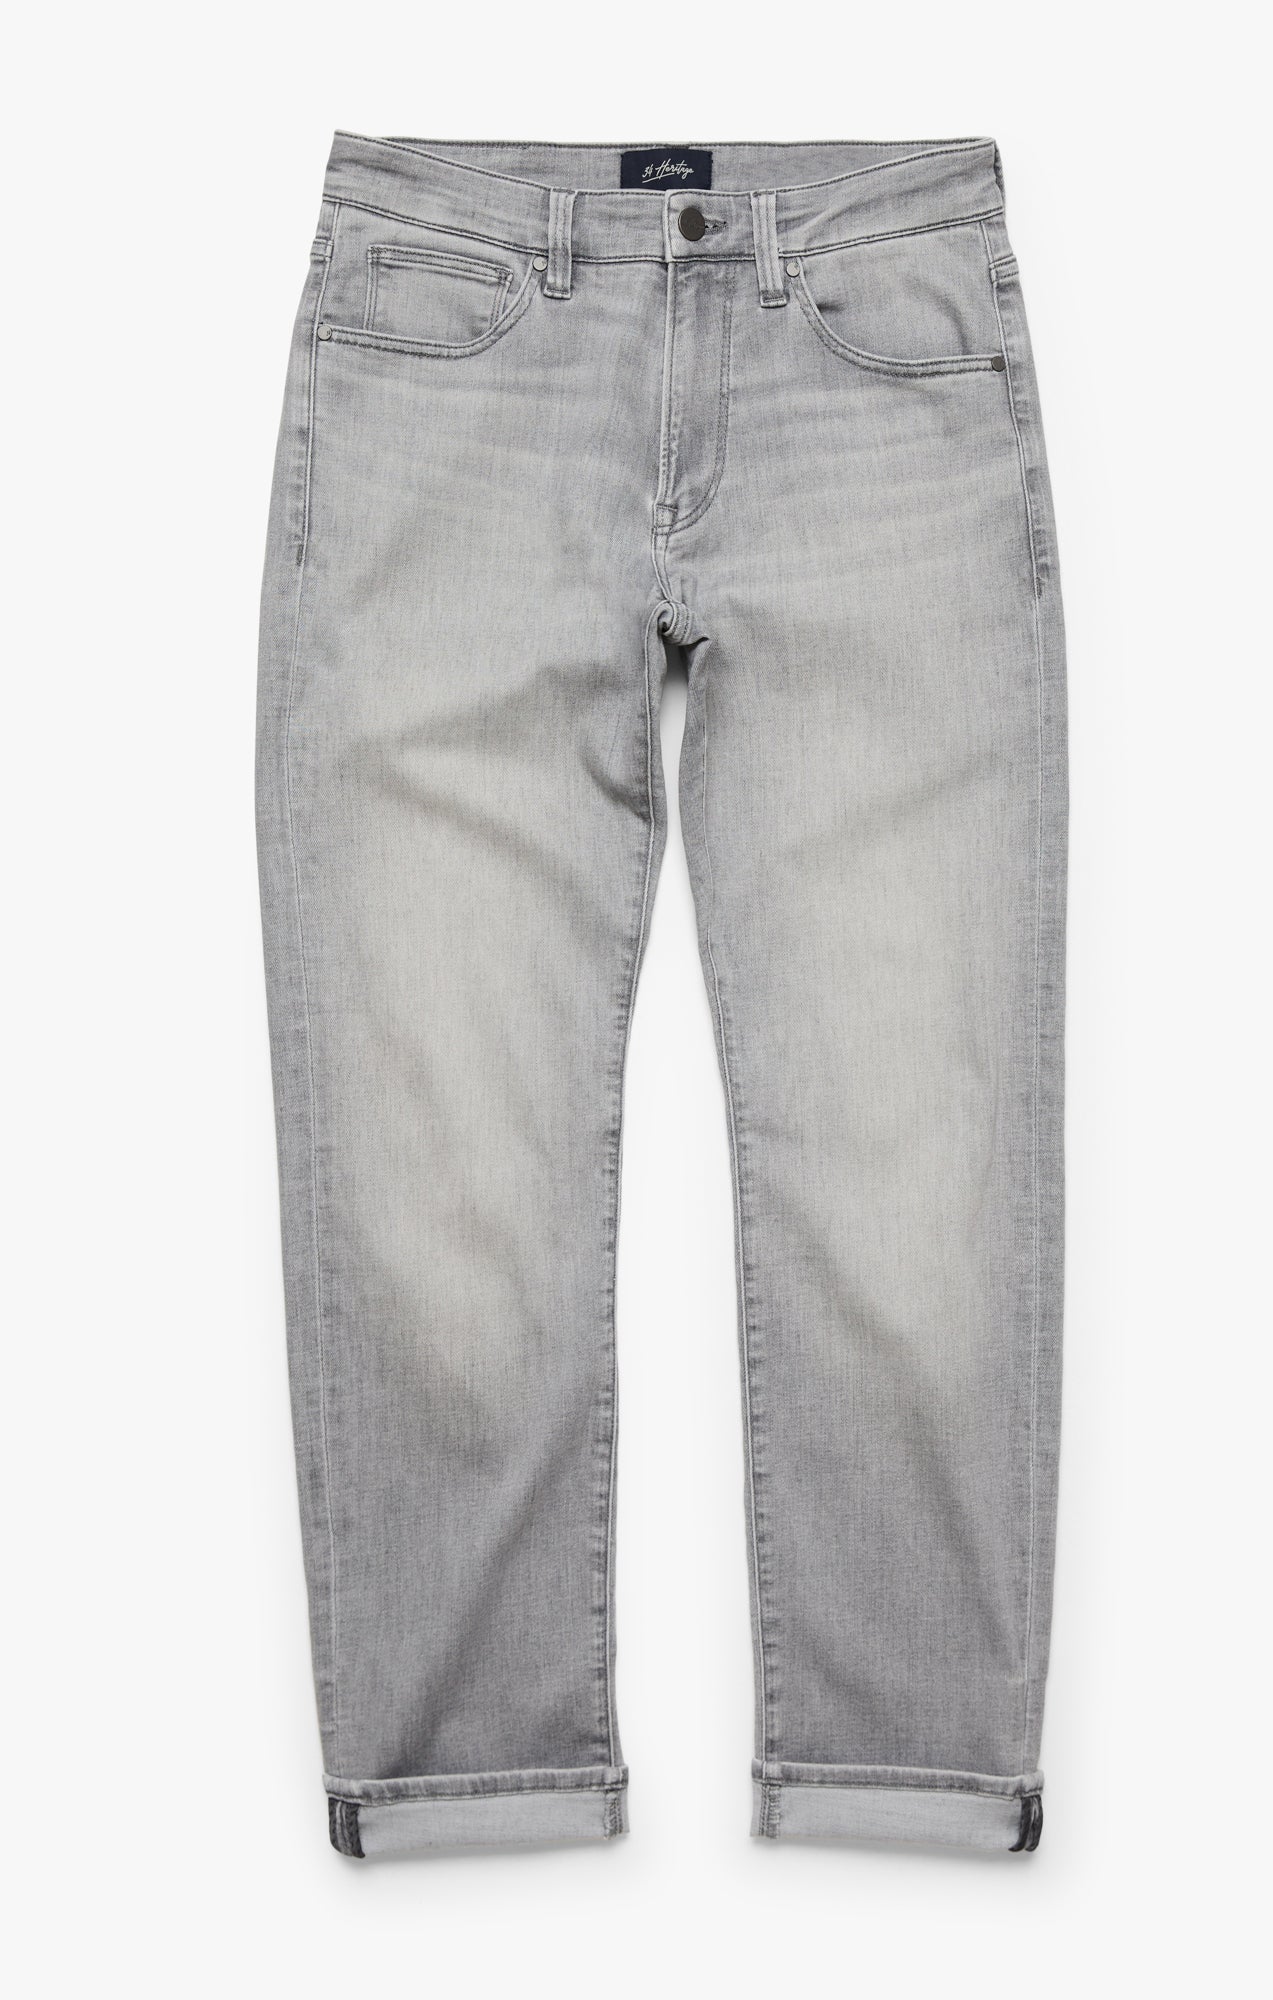 Courage Straight Leg Jeans In Light Grey Urban